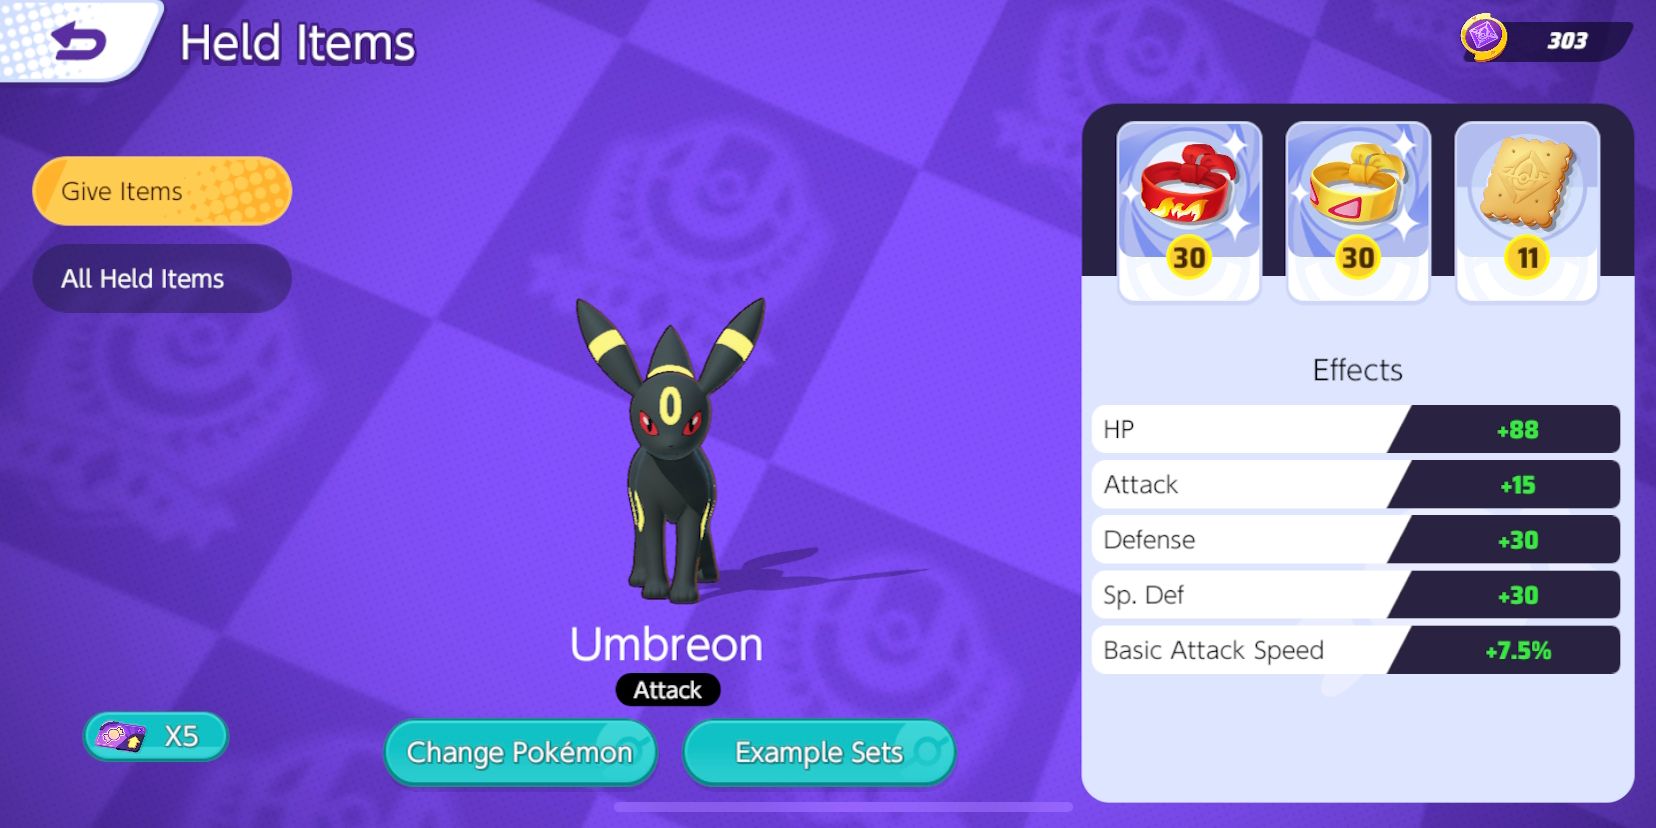 Umbreon Held Item selection screen, with Muscle Band, Focus Band and Aeos Cookie chosen